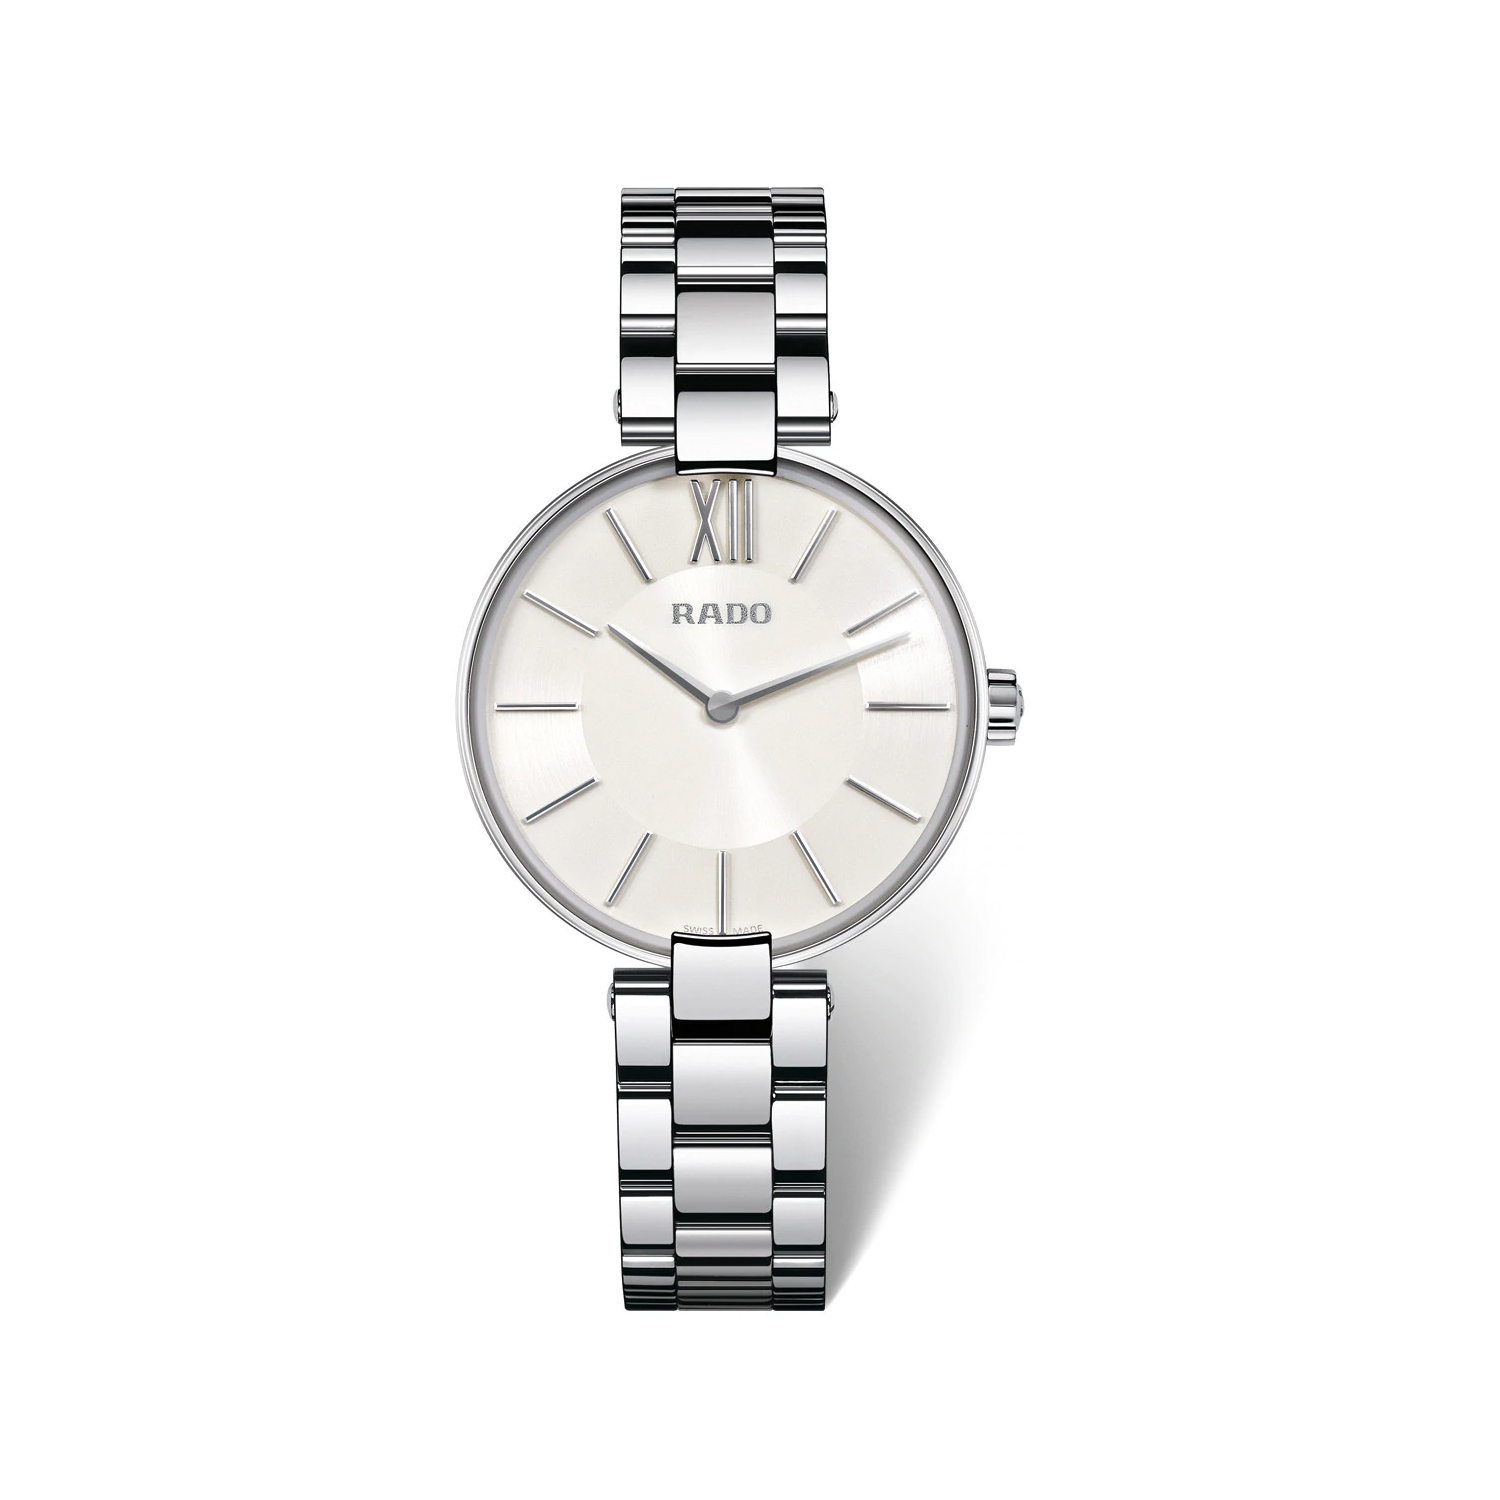 RADO Coupole Stainless Steel Watch